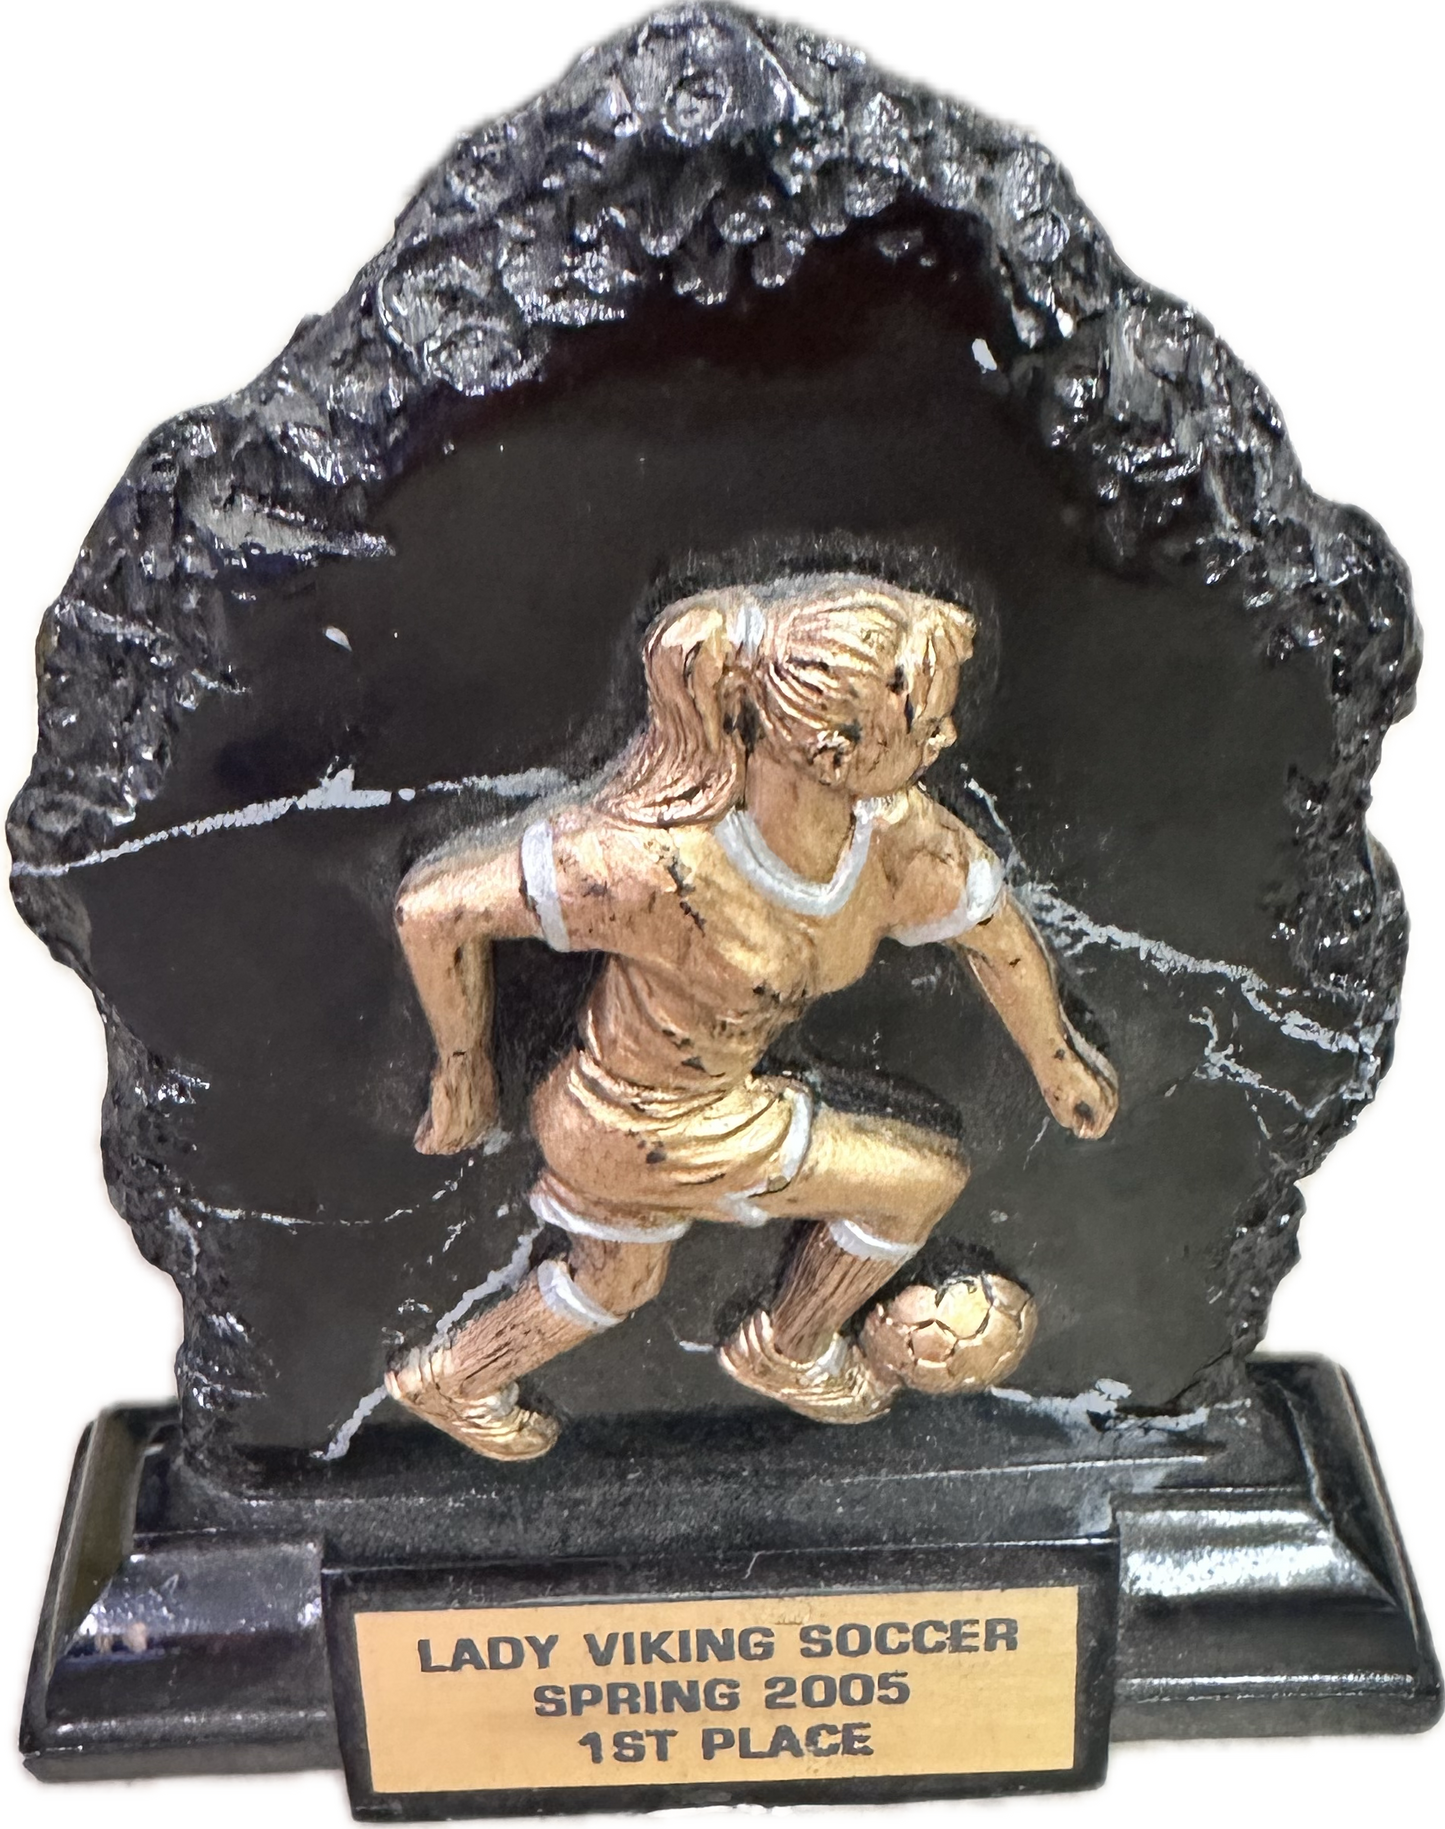 HEROES: Clair Bennet's "Soccer Trophy”